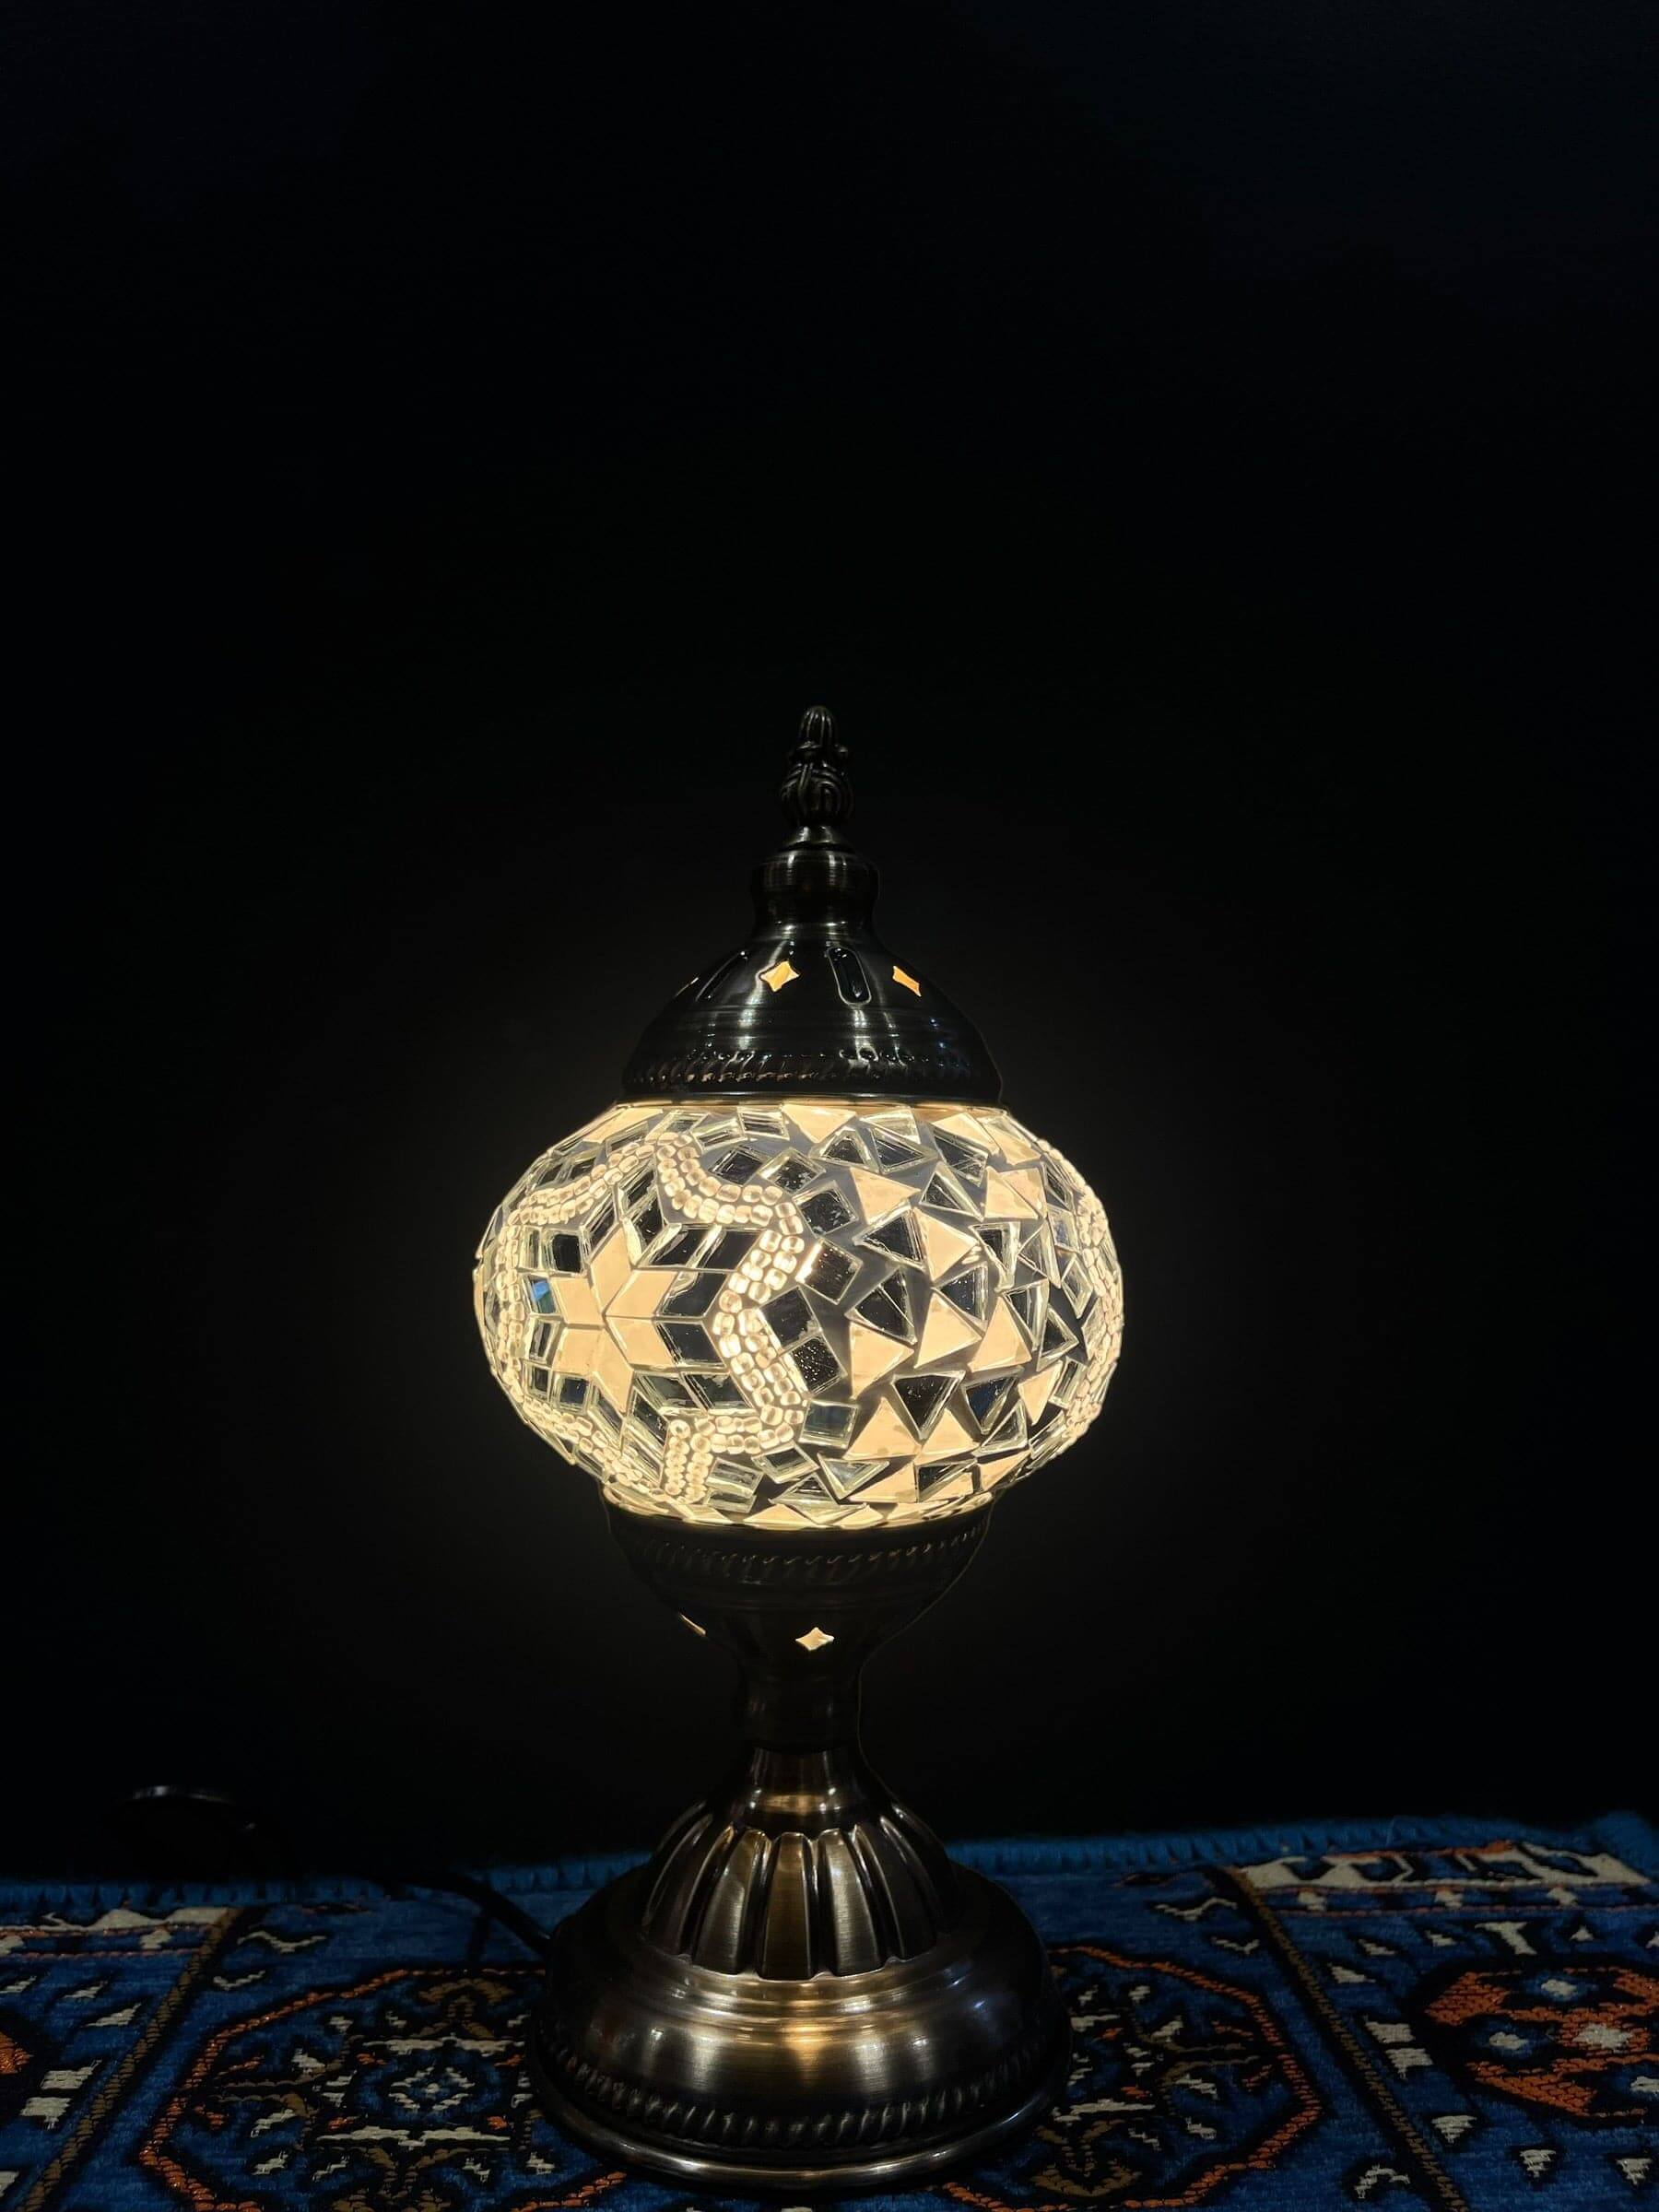 Mosaic Table Lamp White Star BrightMosaic Lamps: Unique and elegant decorative lighting fixtures featuring mosaic designs crafted from vibrant glass pieces. Add a touch of grace and charm to your space with these exquisite lamps, suitable for various sett